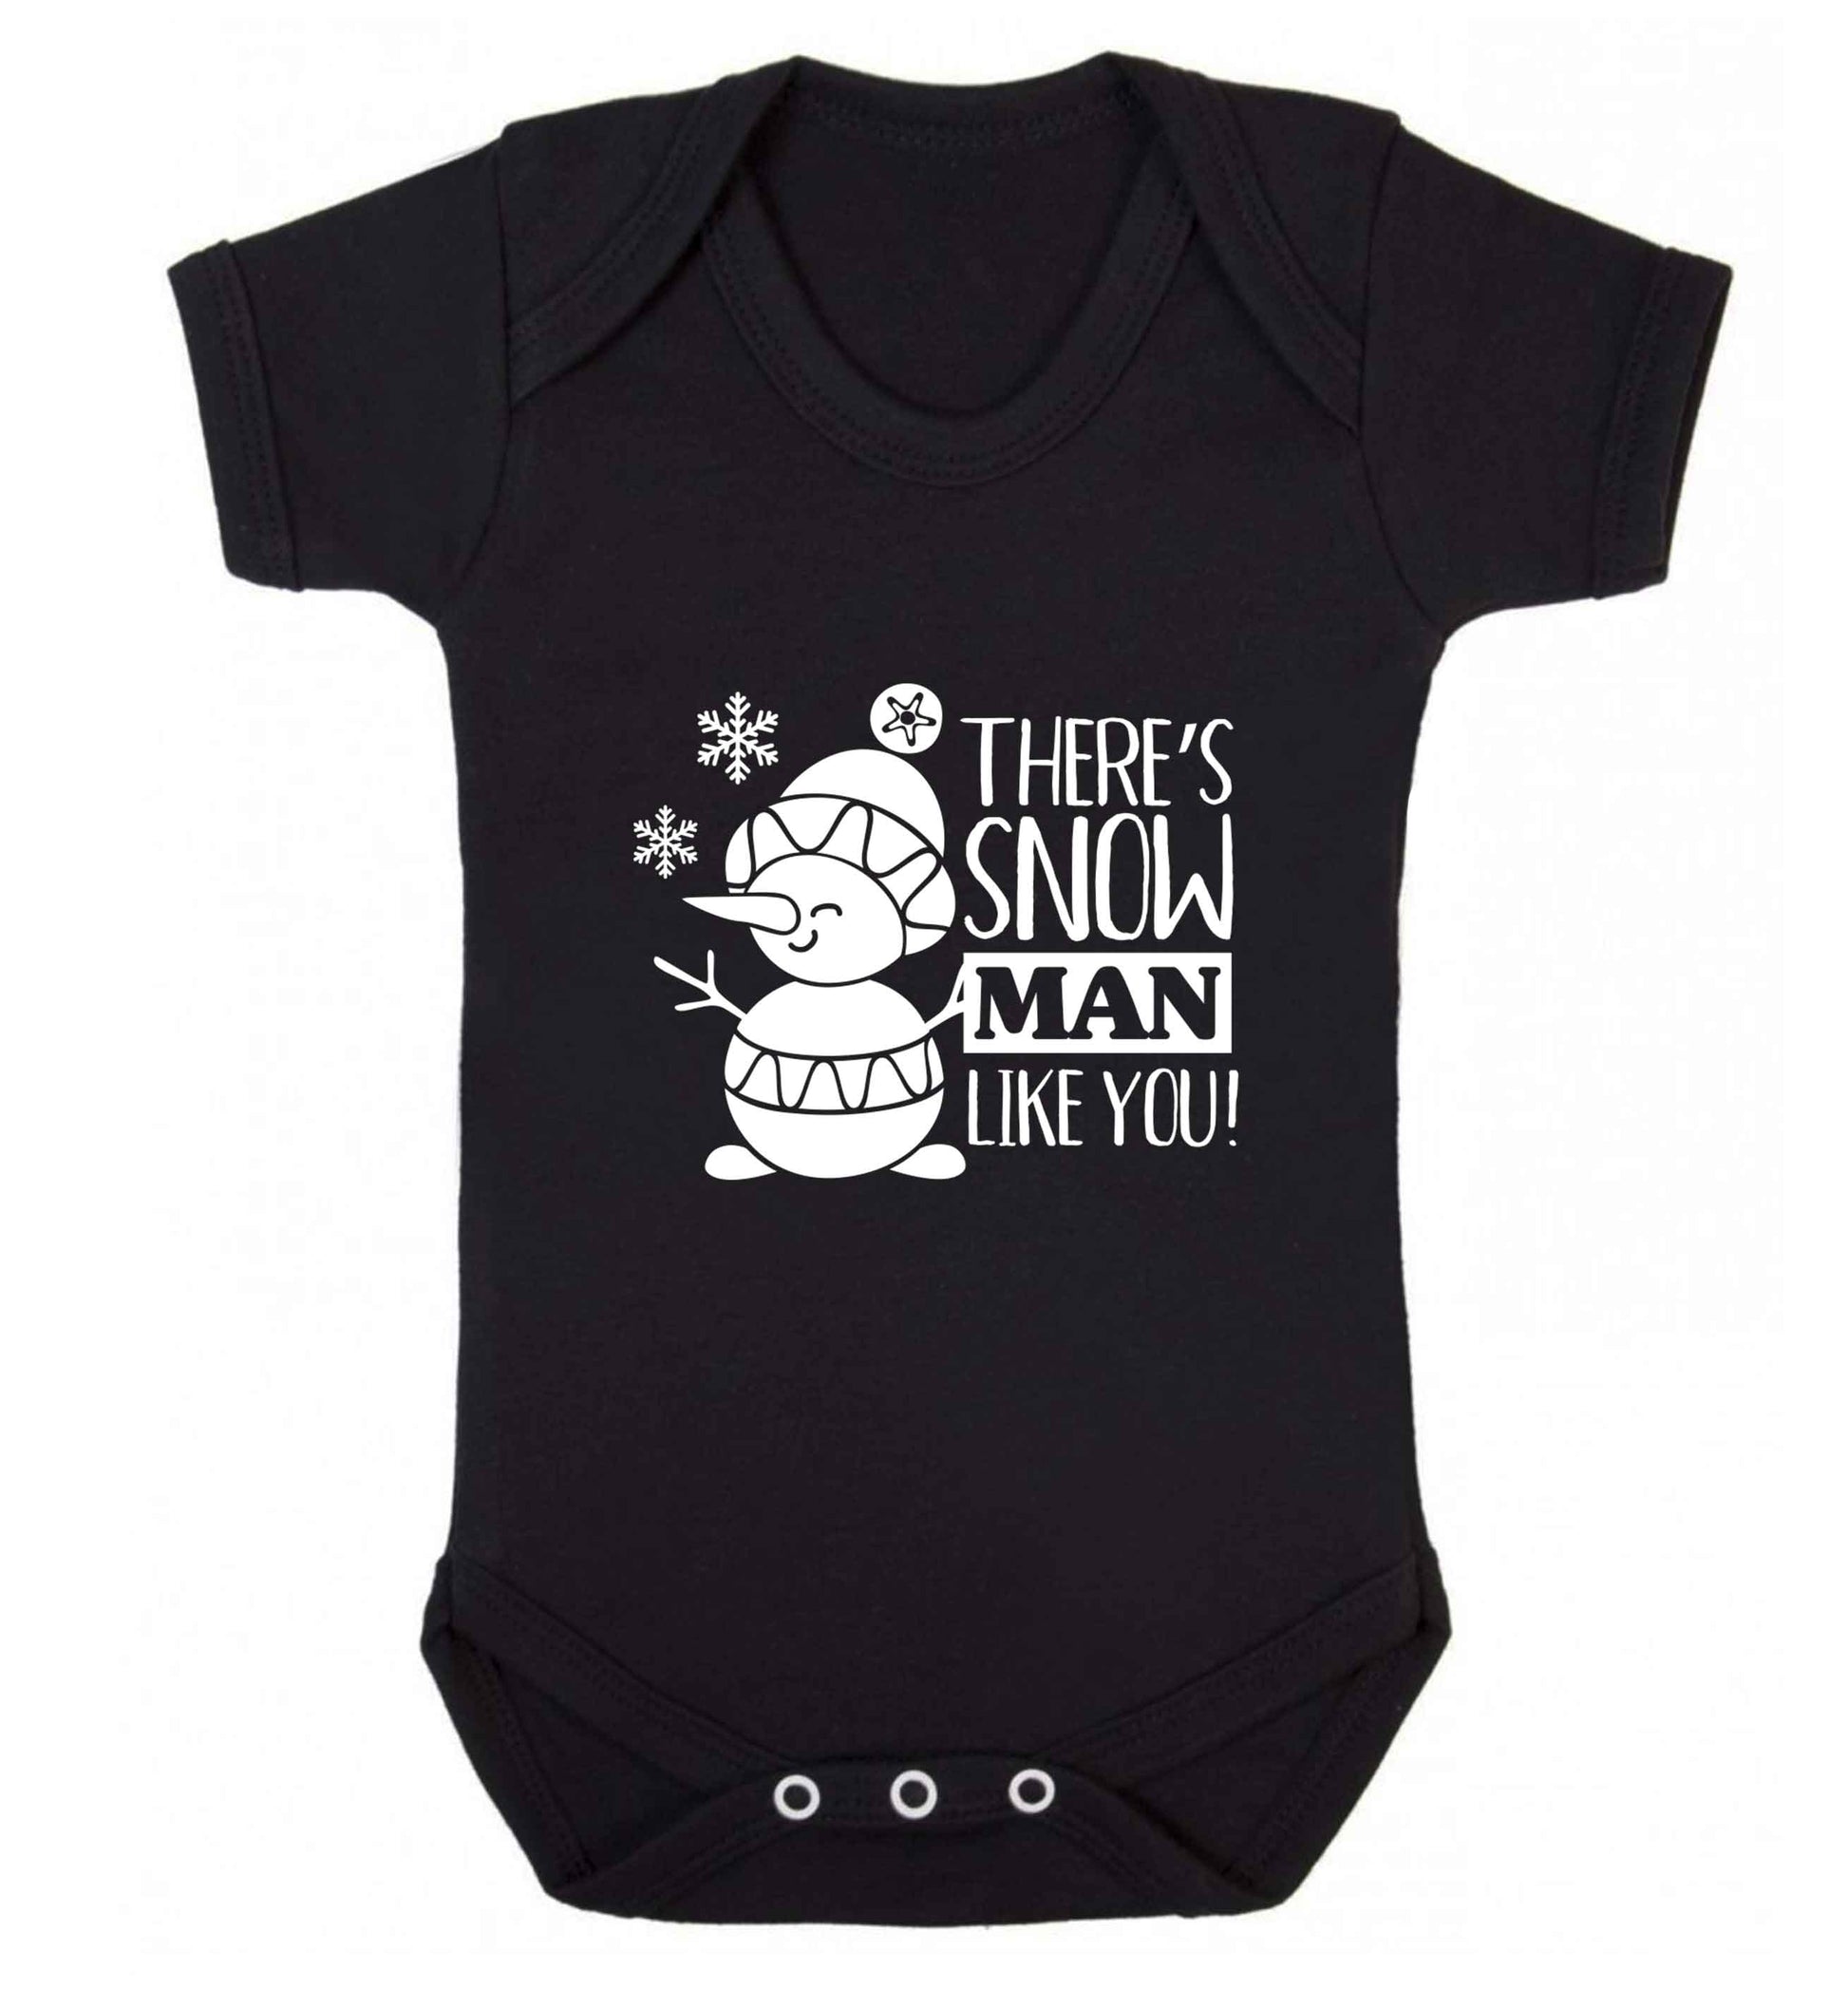 There's snow man like you baby vest black 18-24 months